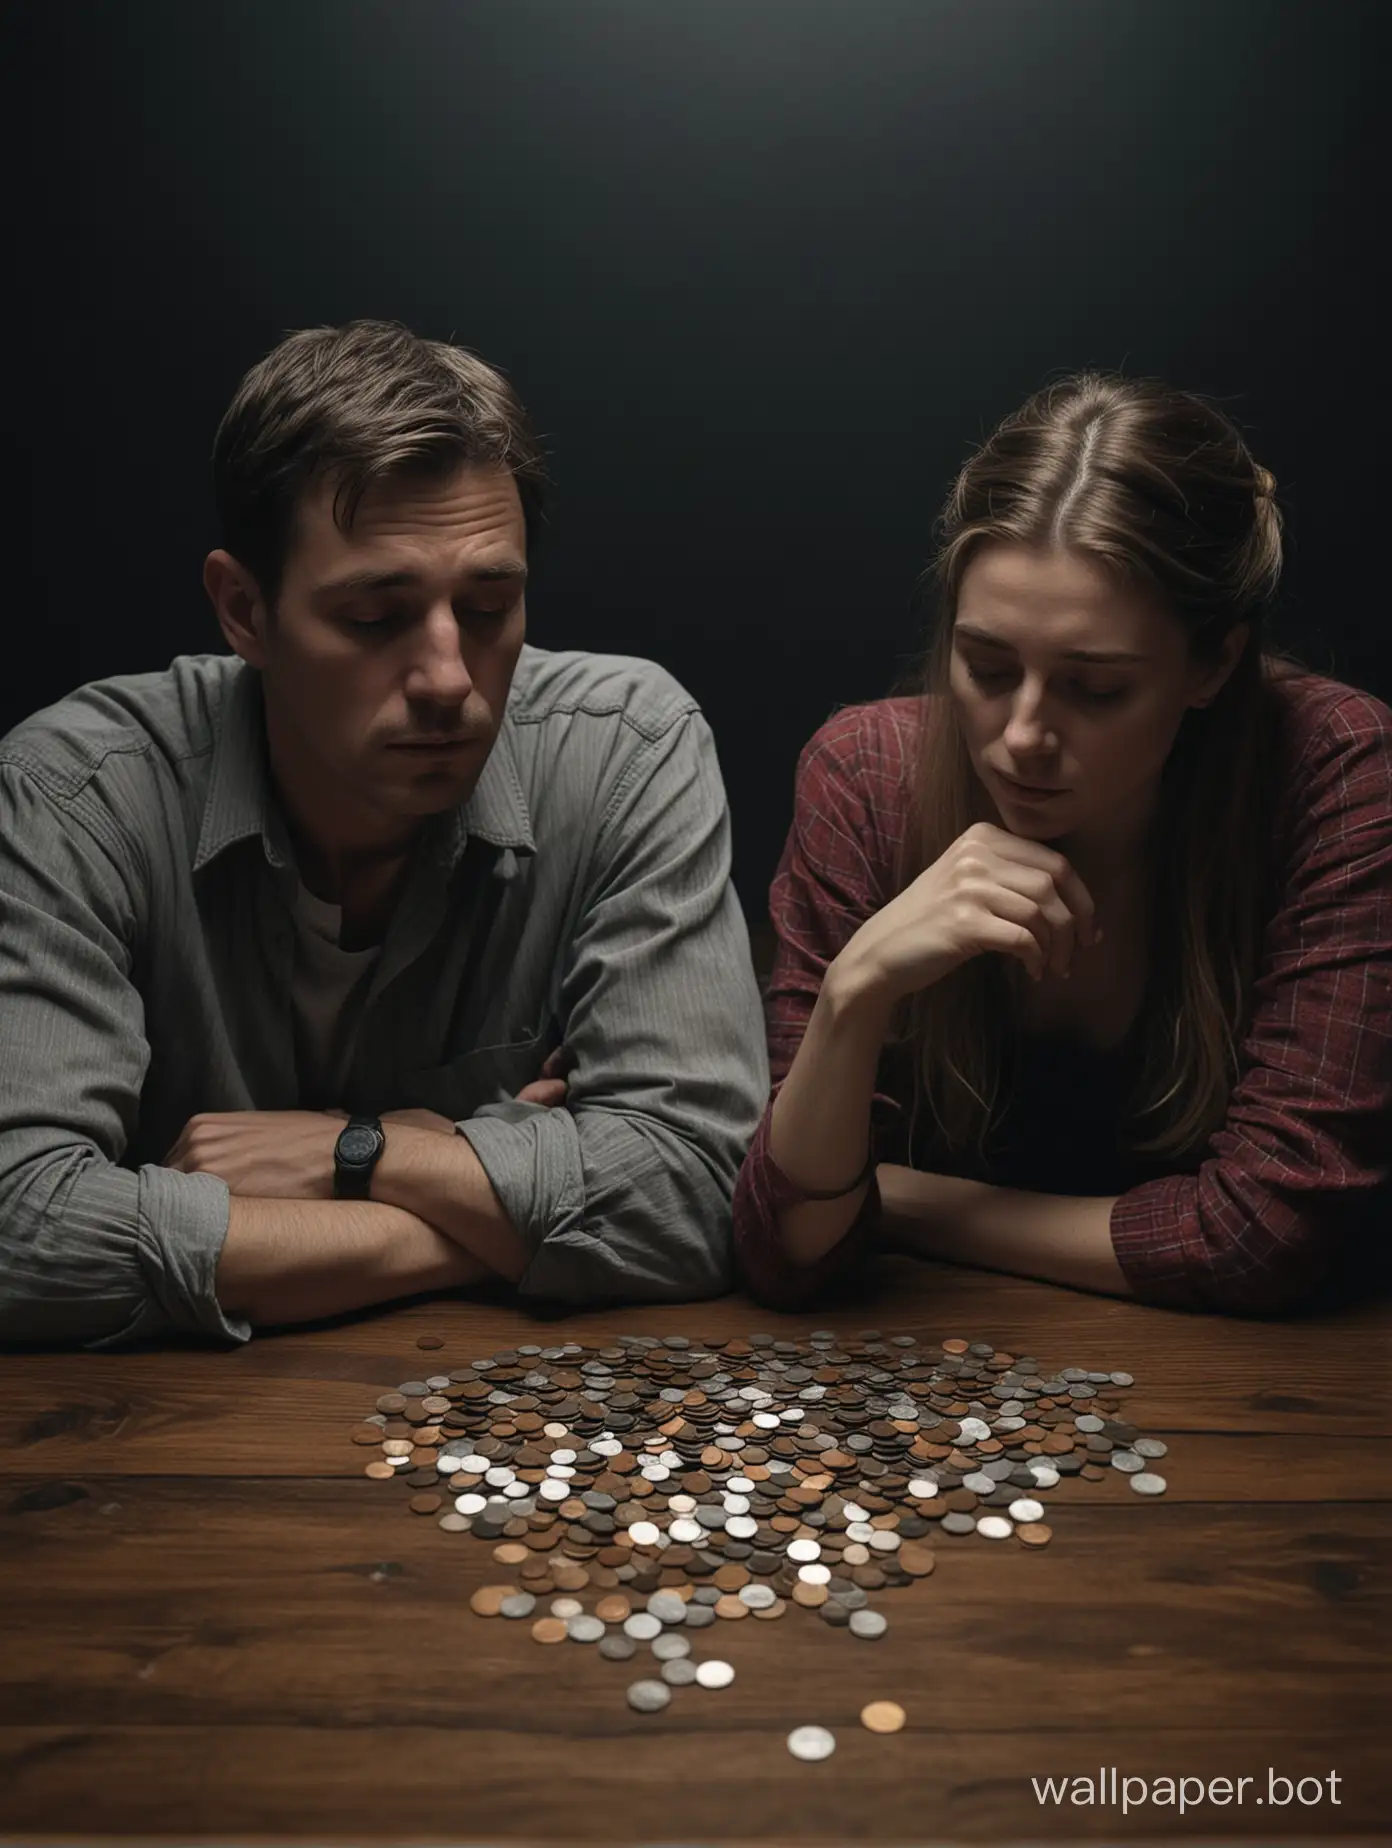 A sad couple sits at a table counting the small amount of coins they have,  cinematic, dark, sad